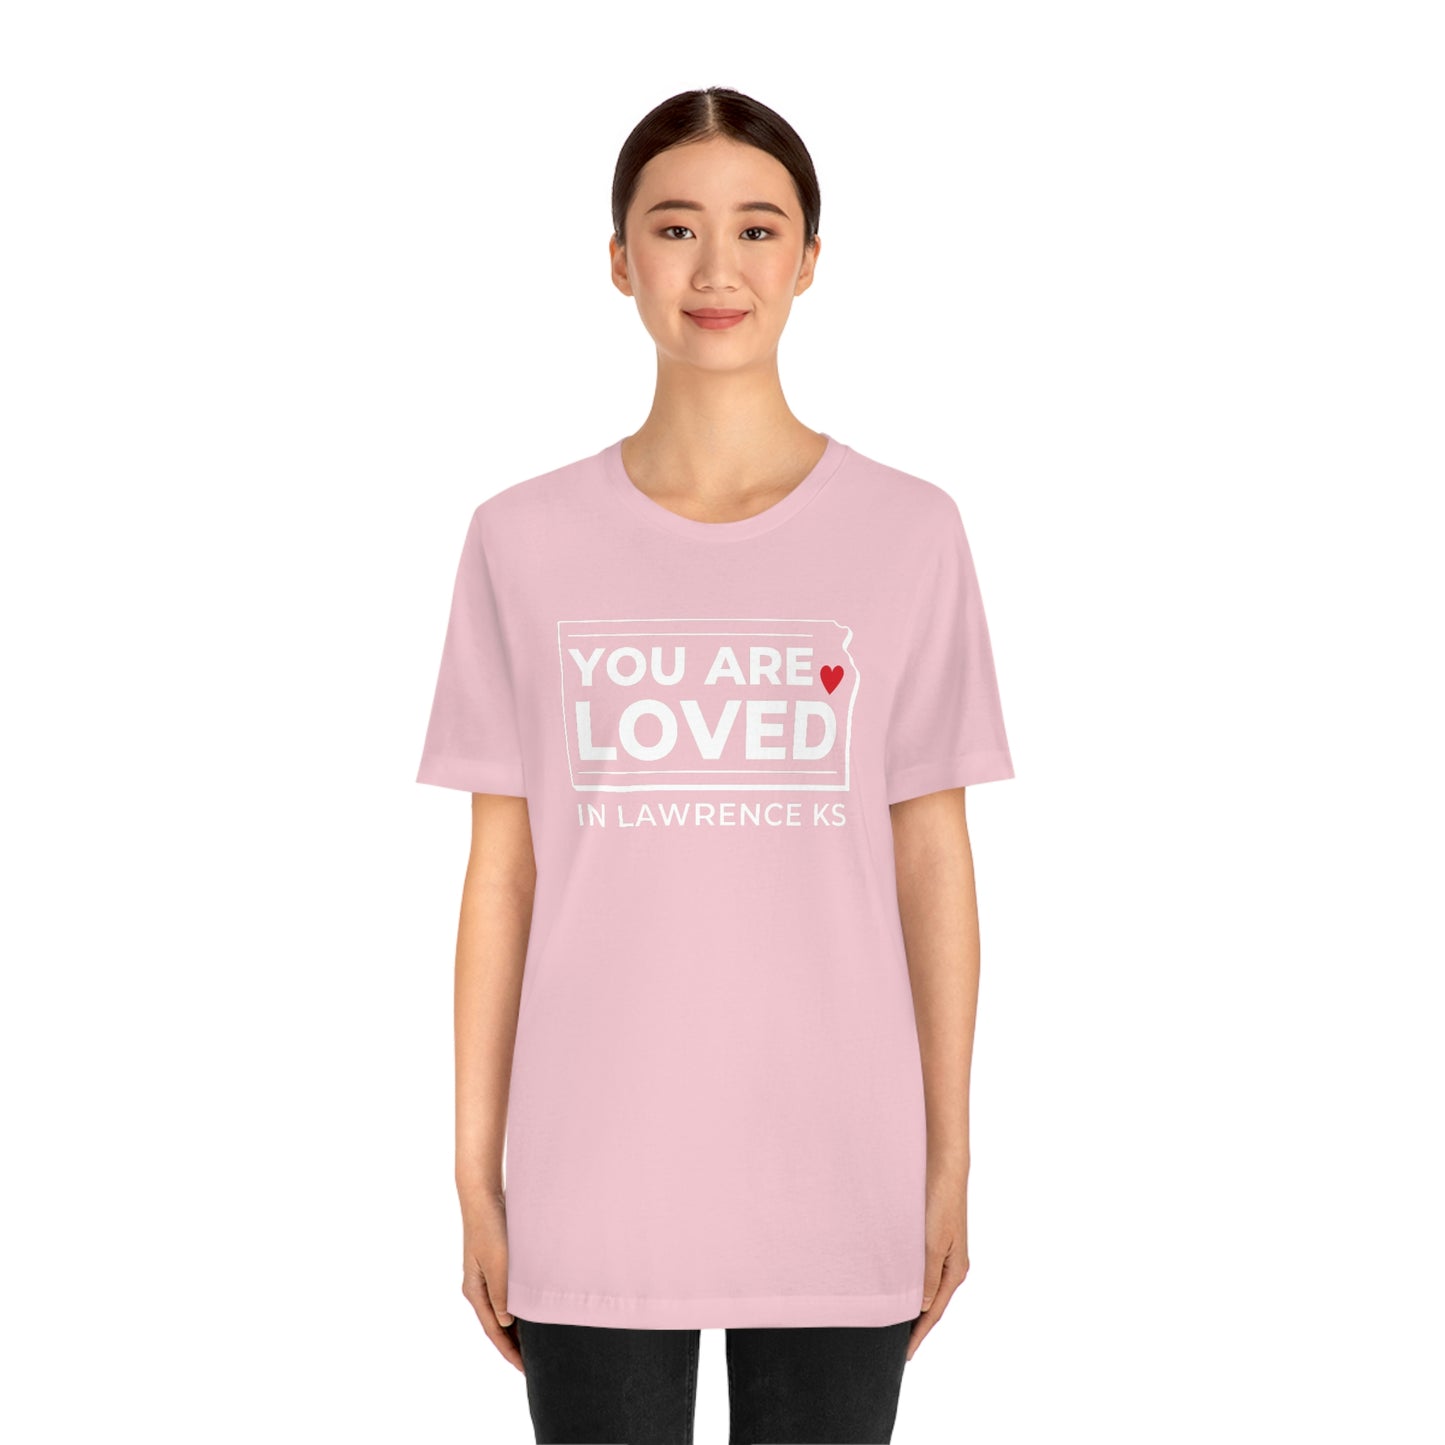 "YOU ARE LOVED ❤️ in Lawrence KS" T-Shirt  [PINK]